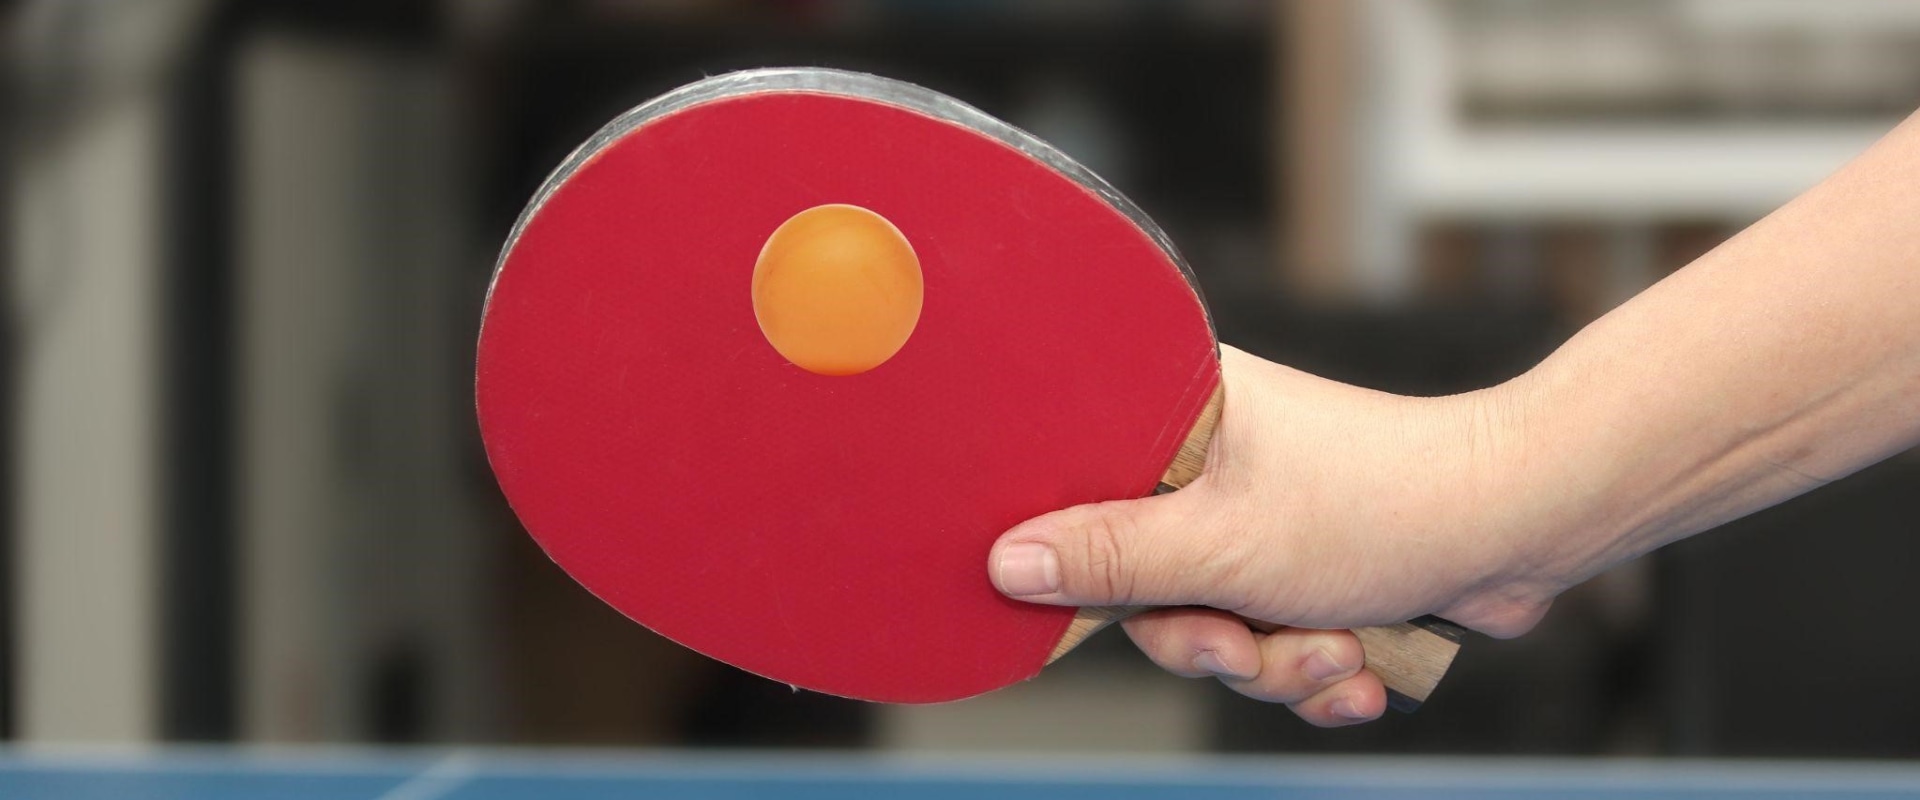 Table Tennis Practice Drills: Rules and Exercises for Beginners